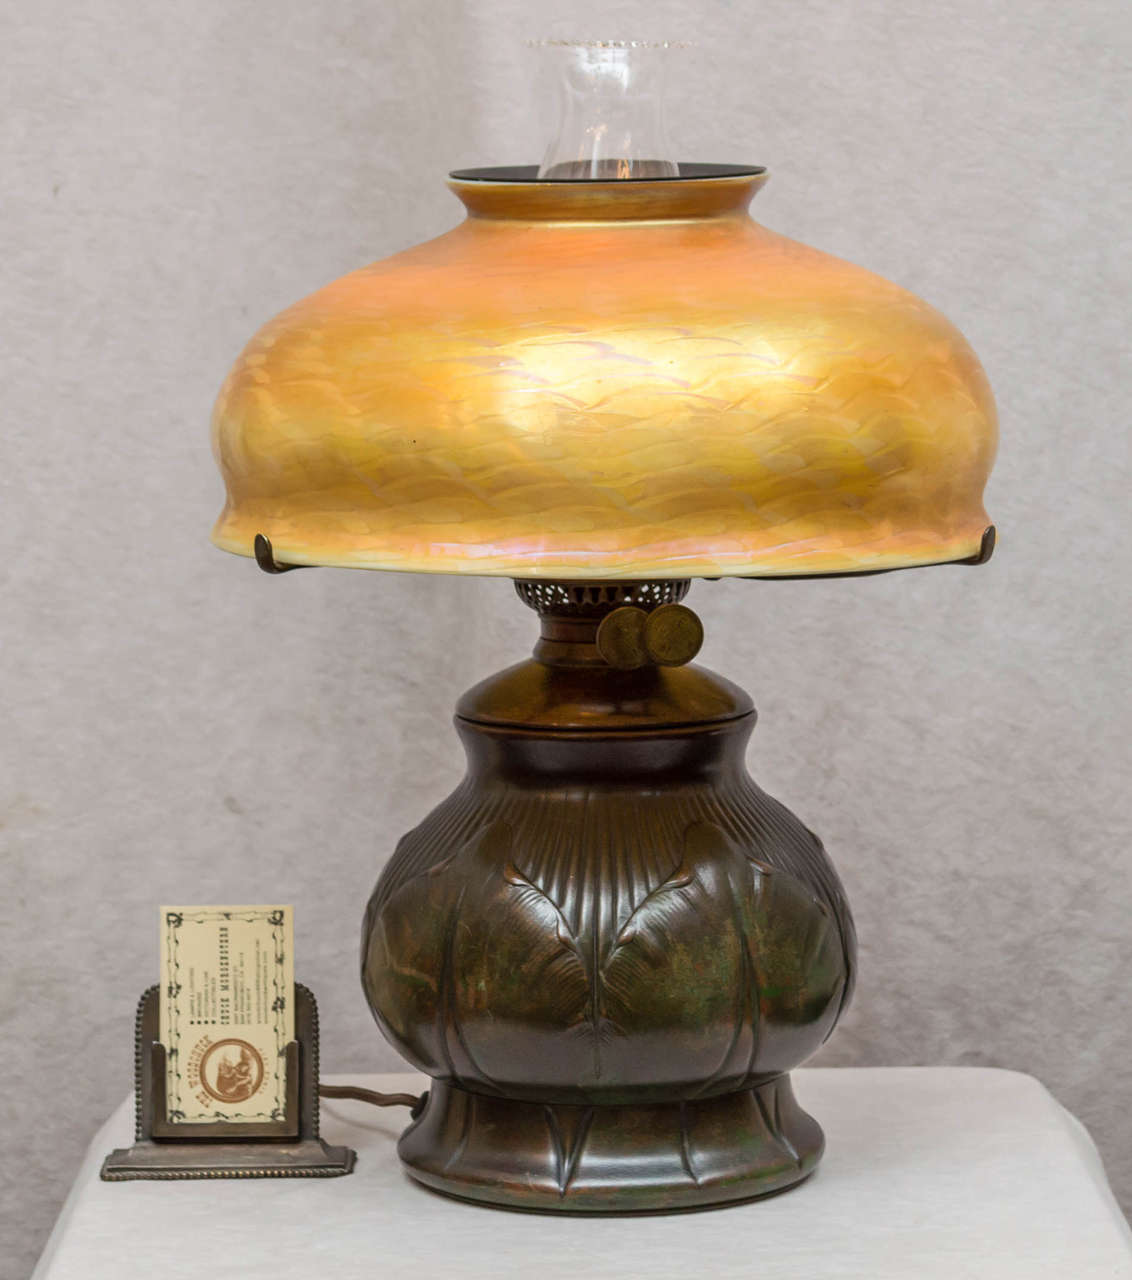 Offering here a fine example of a Tiffany Lamp. The bulbous base has all the correct parts,is signed, and has that wonderful patina that helped make Tiffany stand above the rest. The shade is 12'' in diameter,is properly signed,and free of any